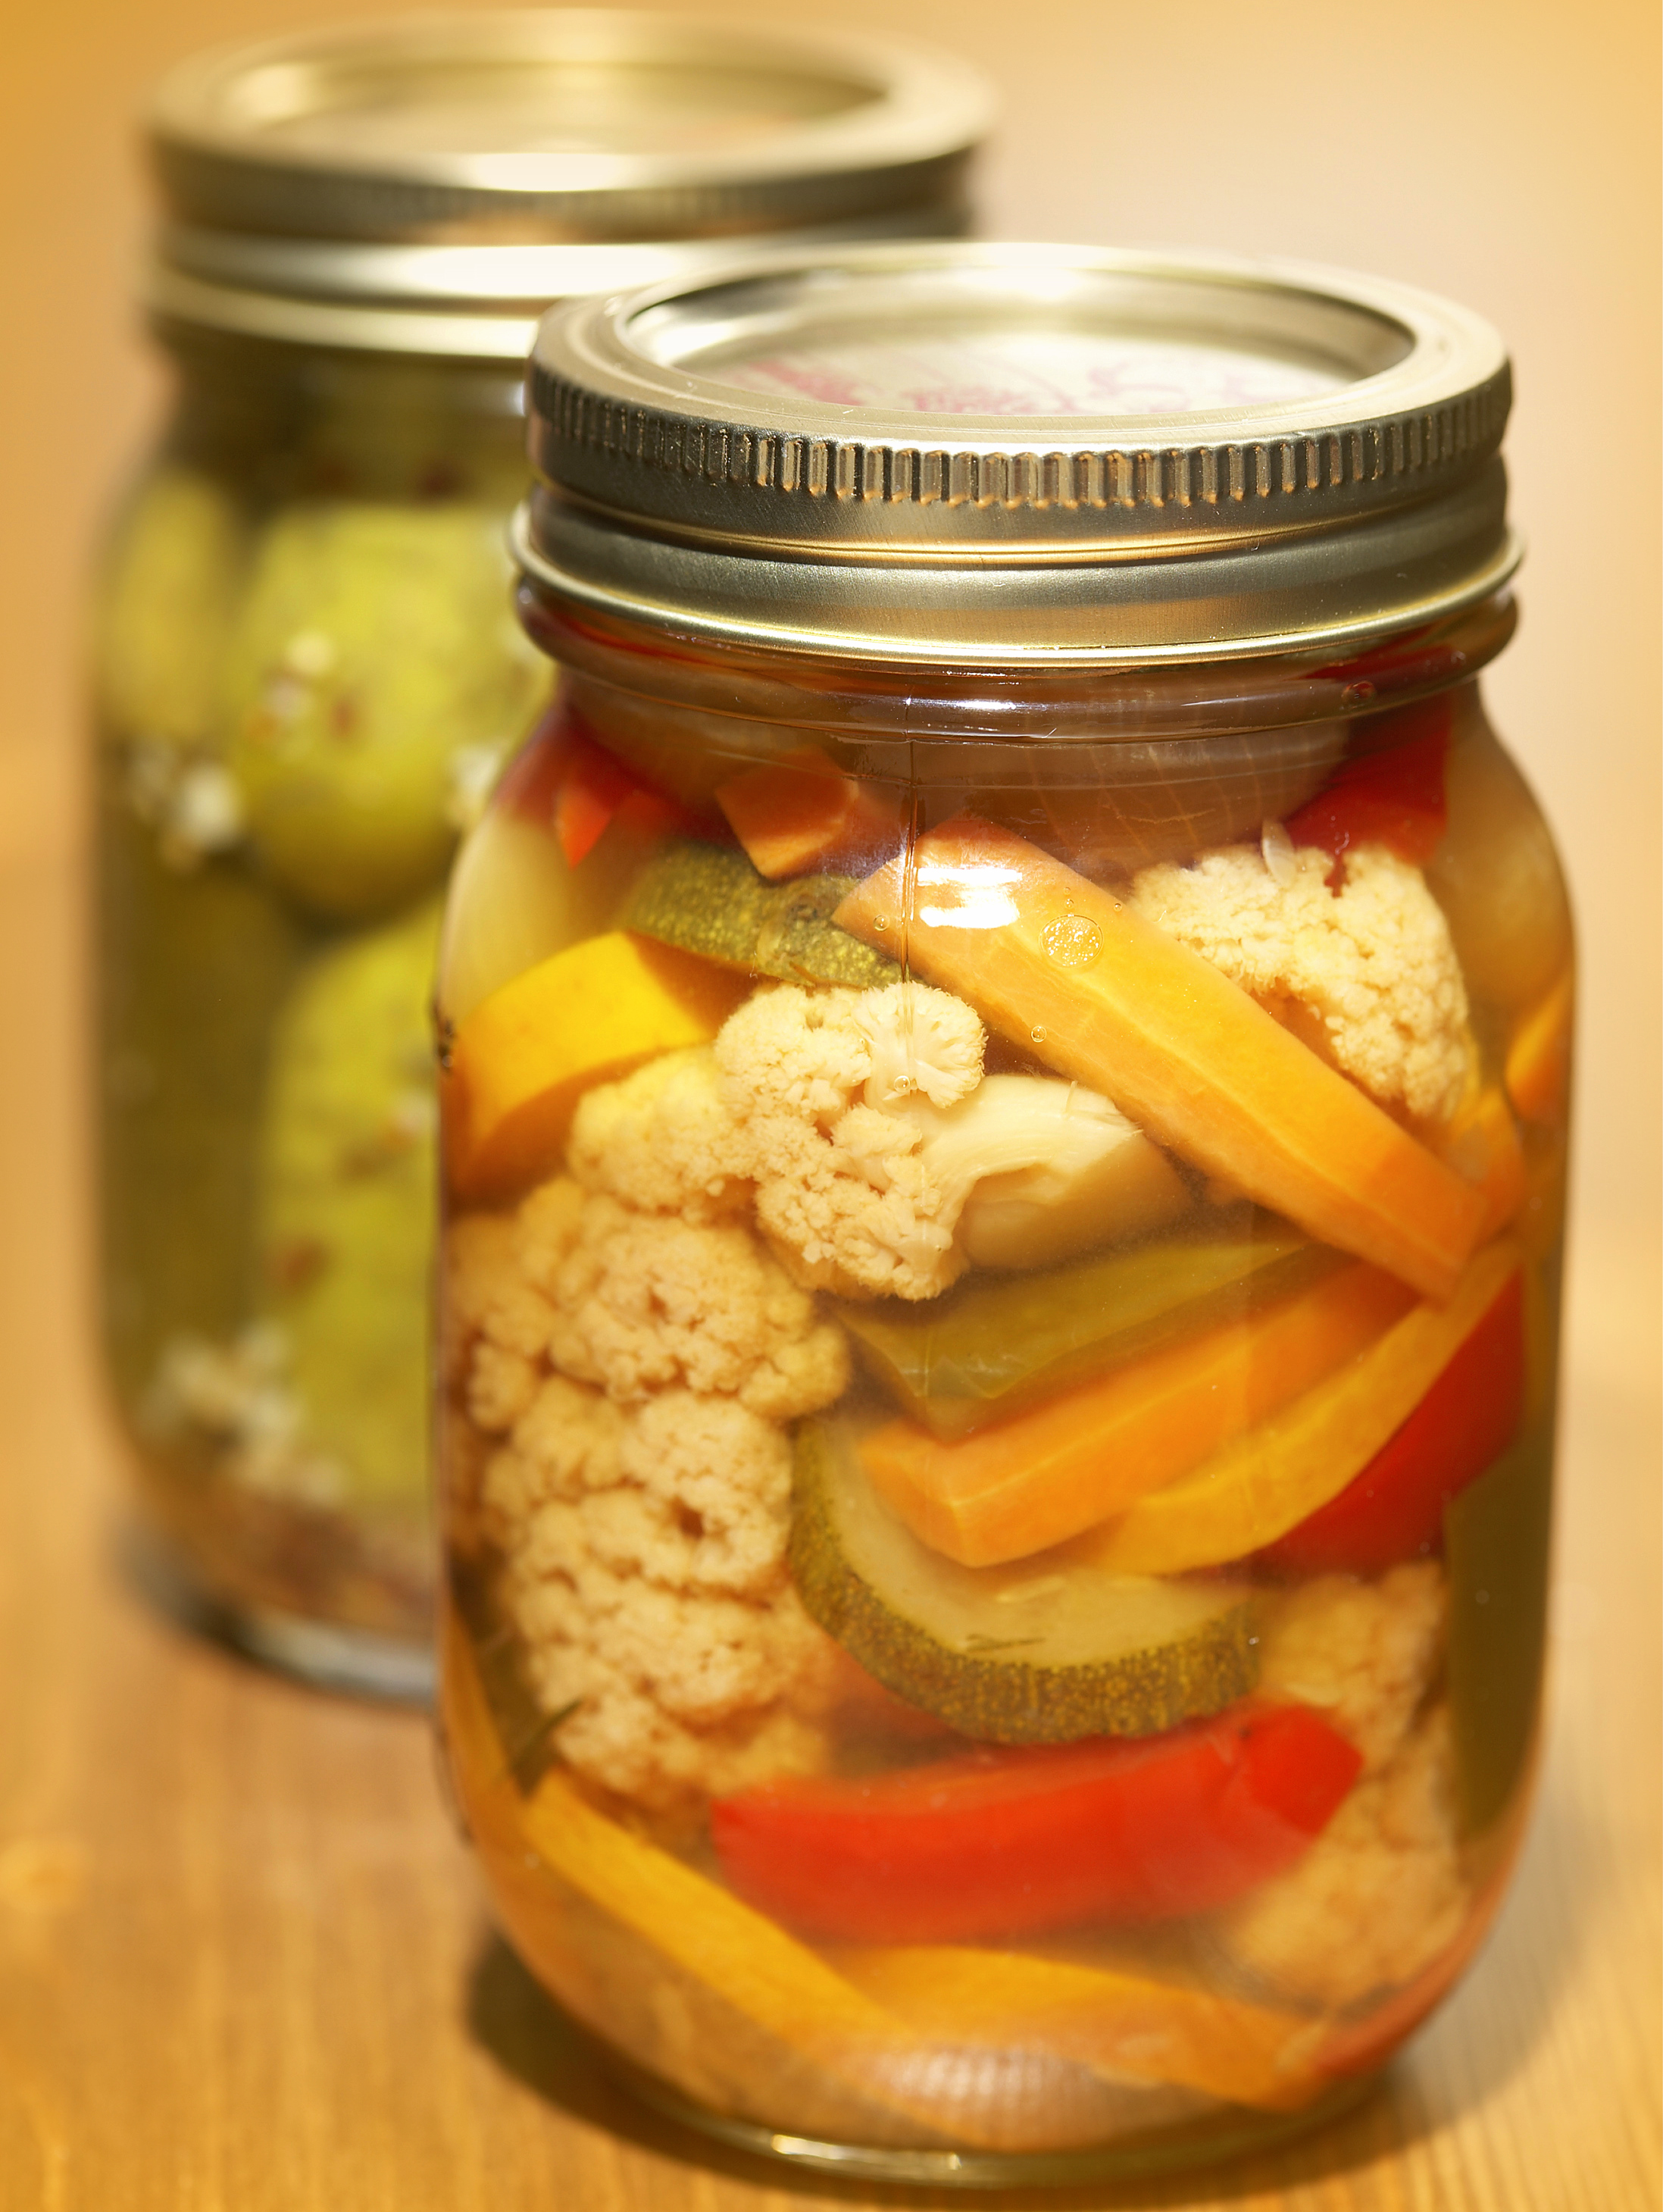 Pickling Recipes and Tips | How to Pickle Fresh Food | The Old ...